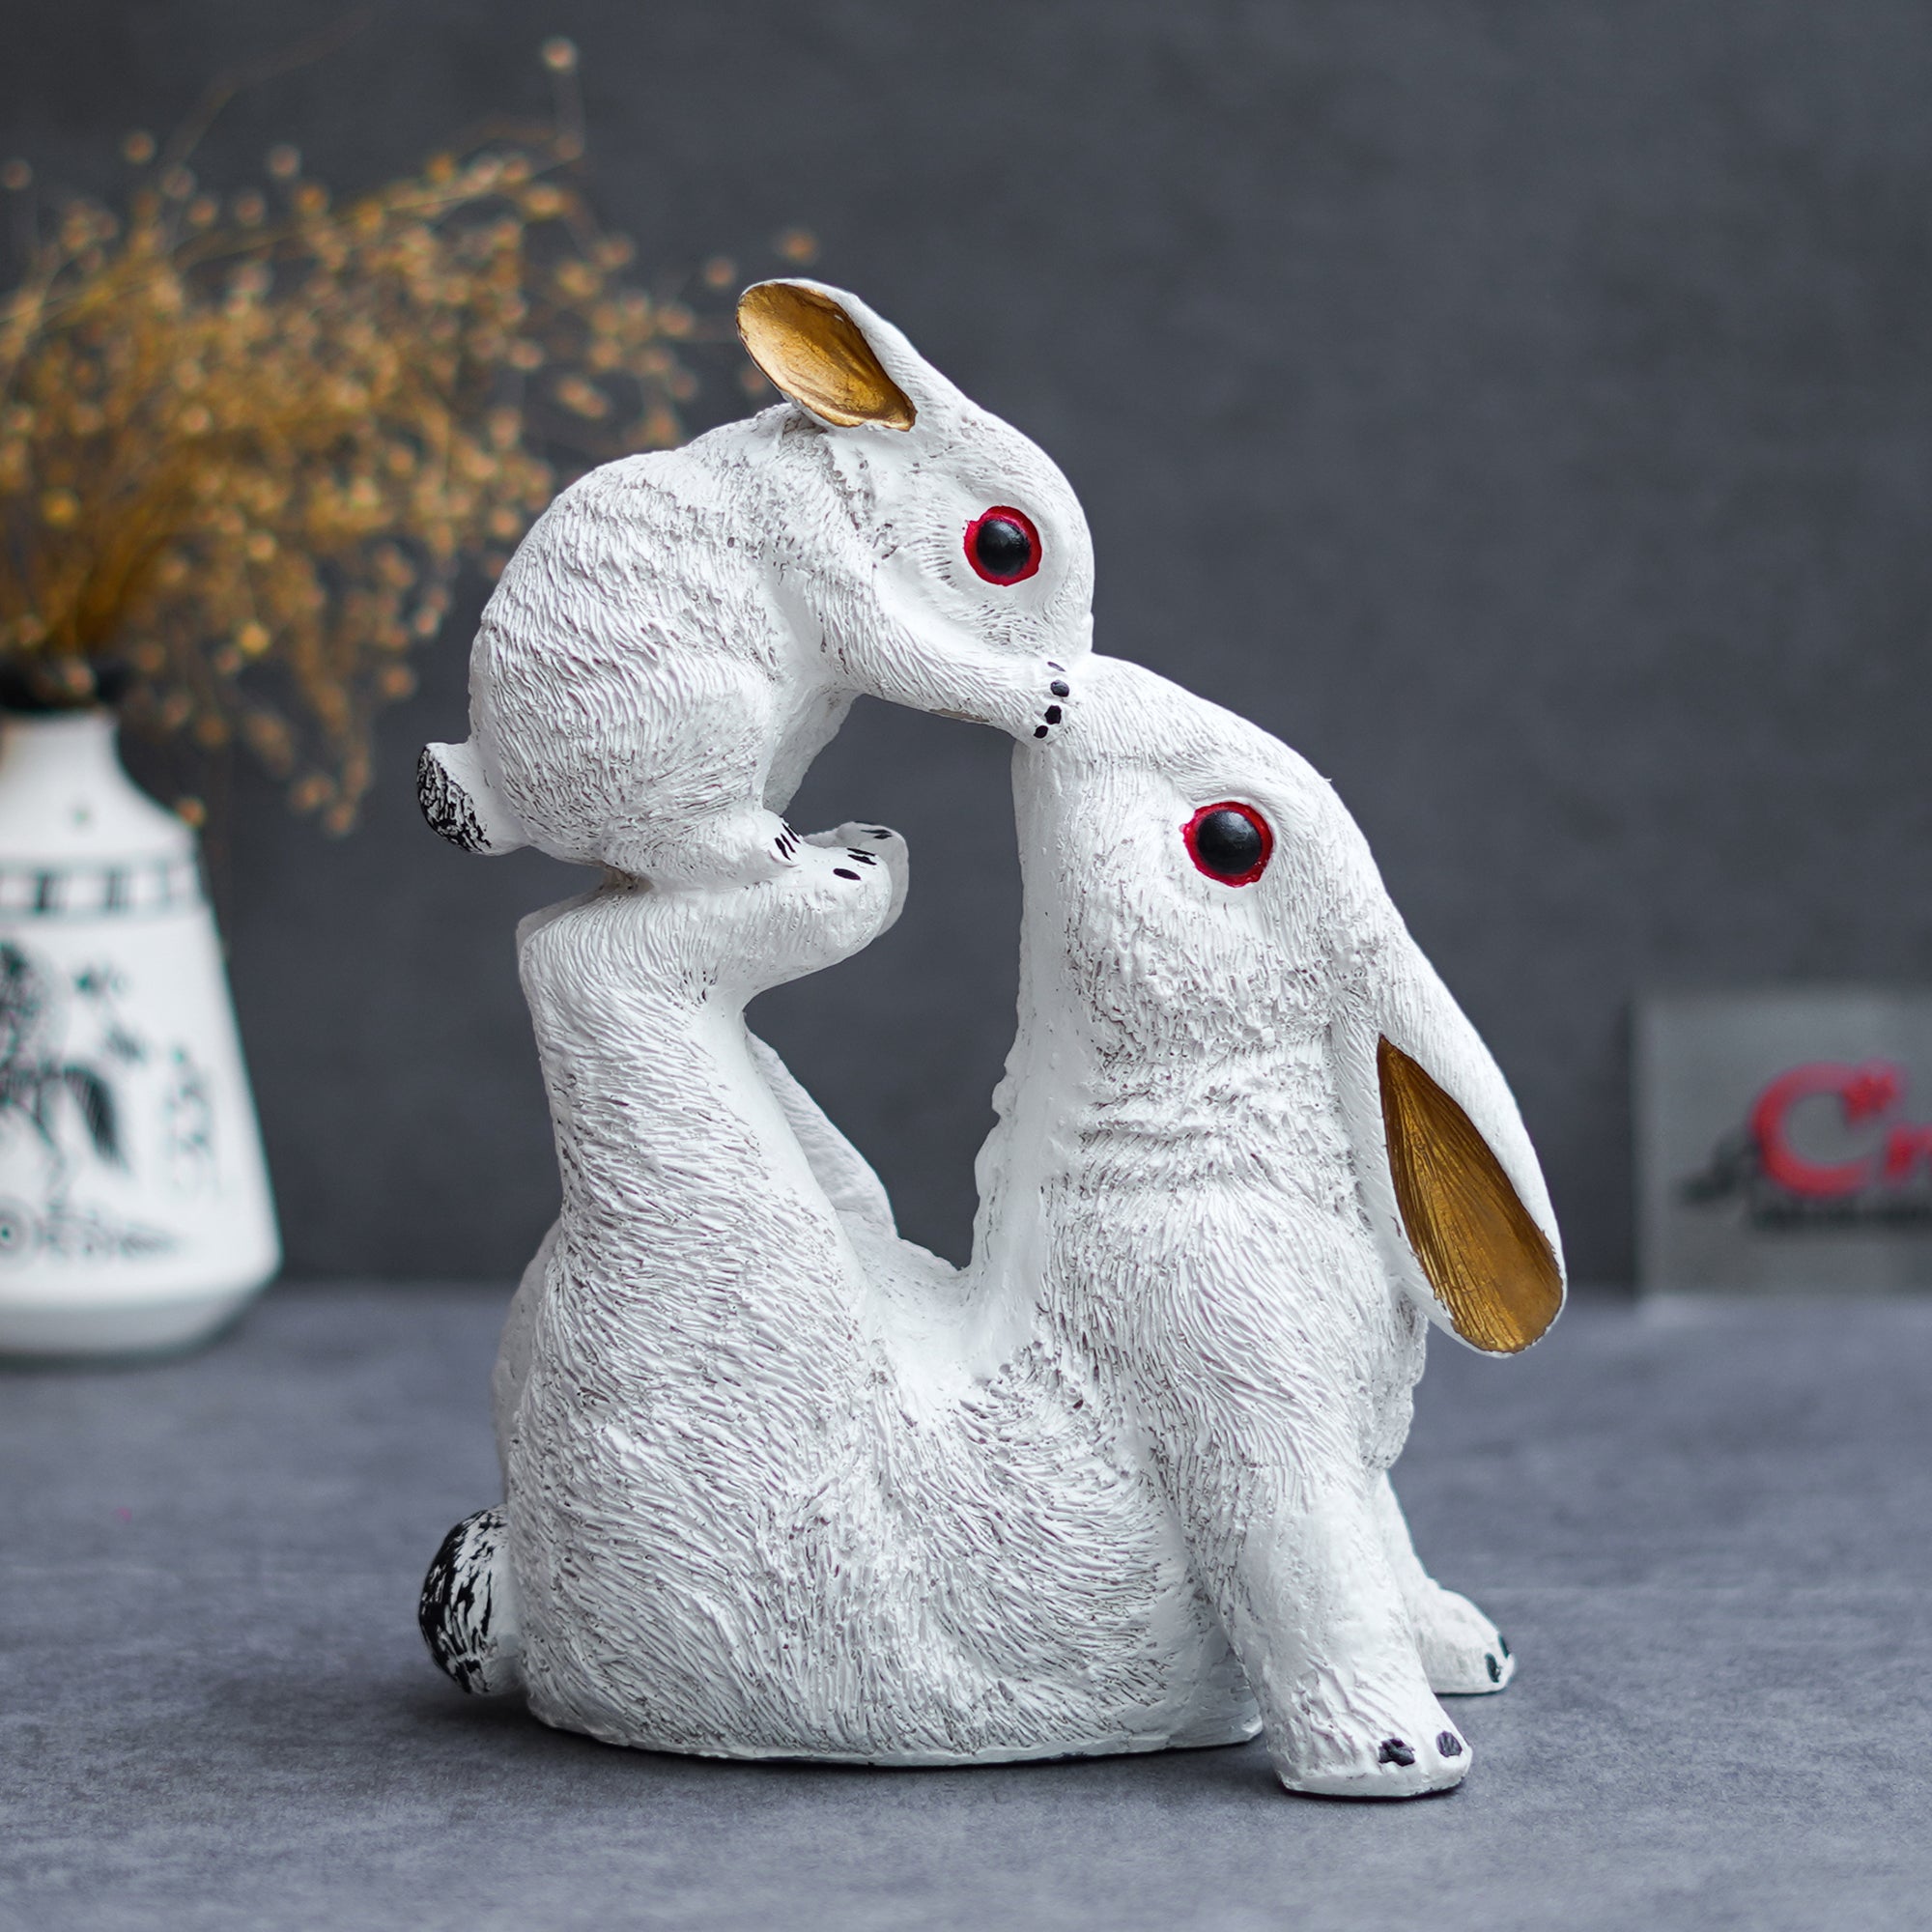 Gold and White Rabbit Statue with Bunny Animal Figurines Decorative Showpiece for Home Decor